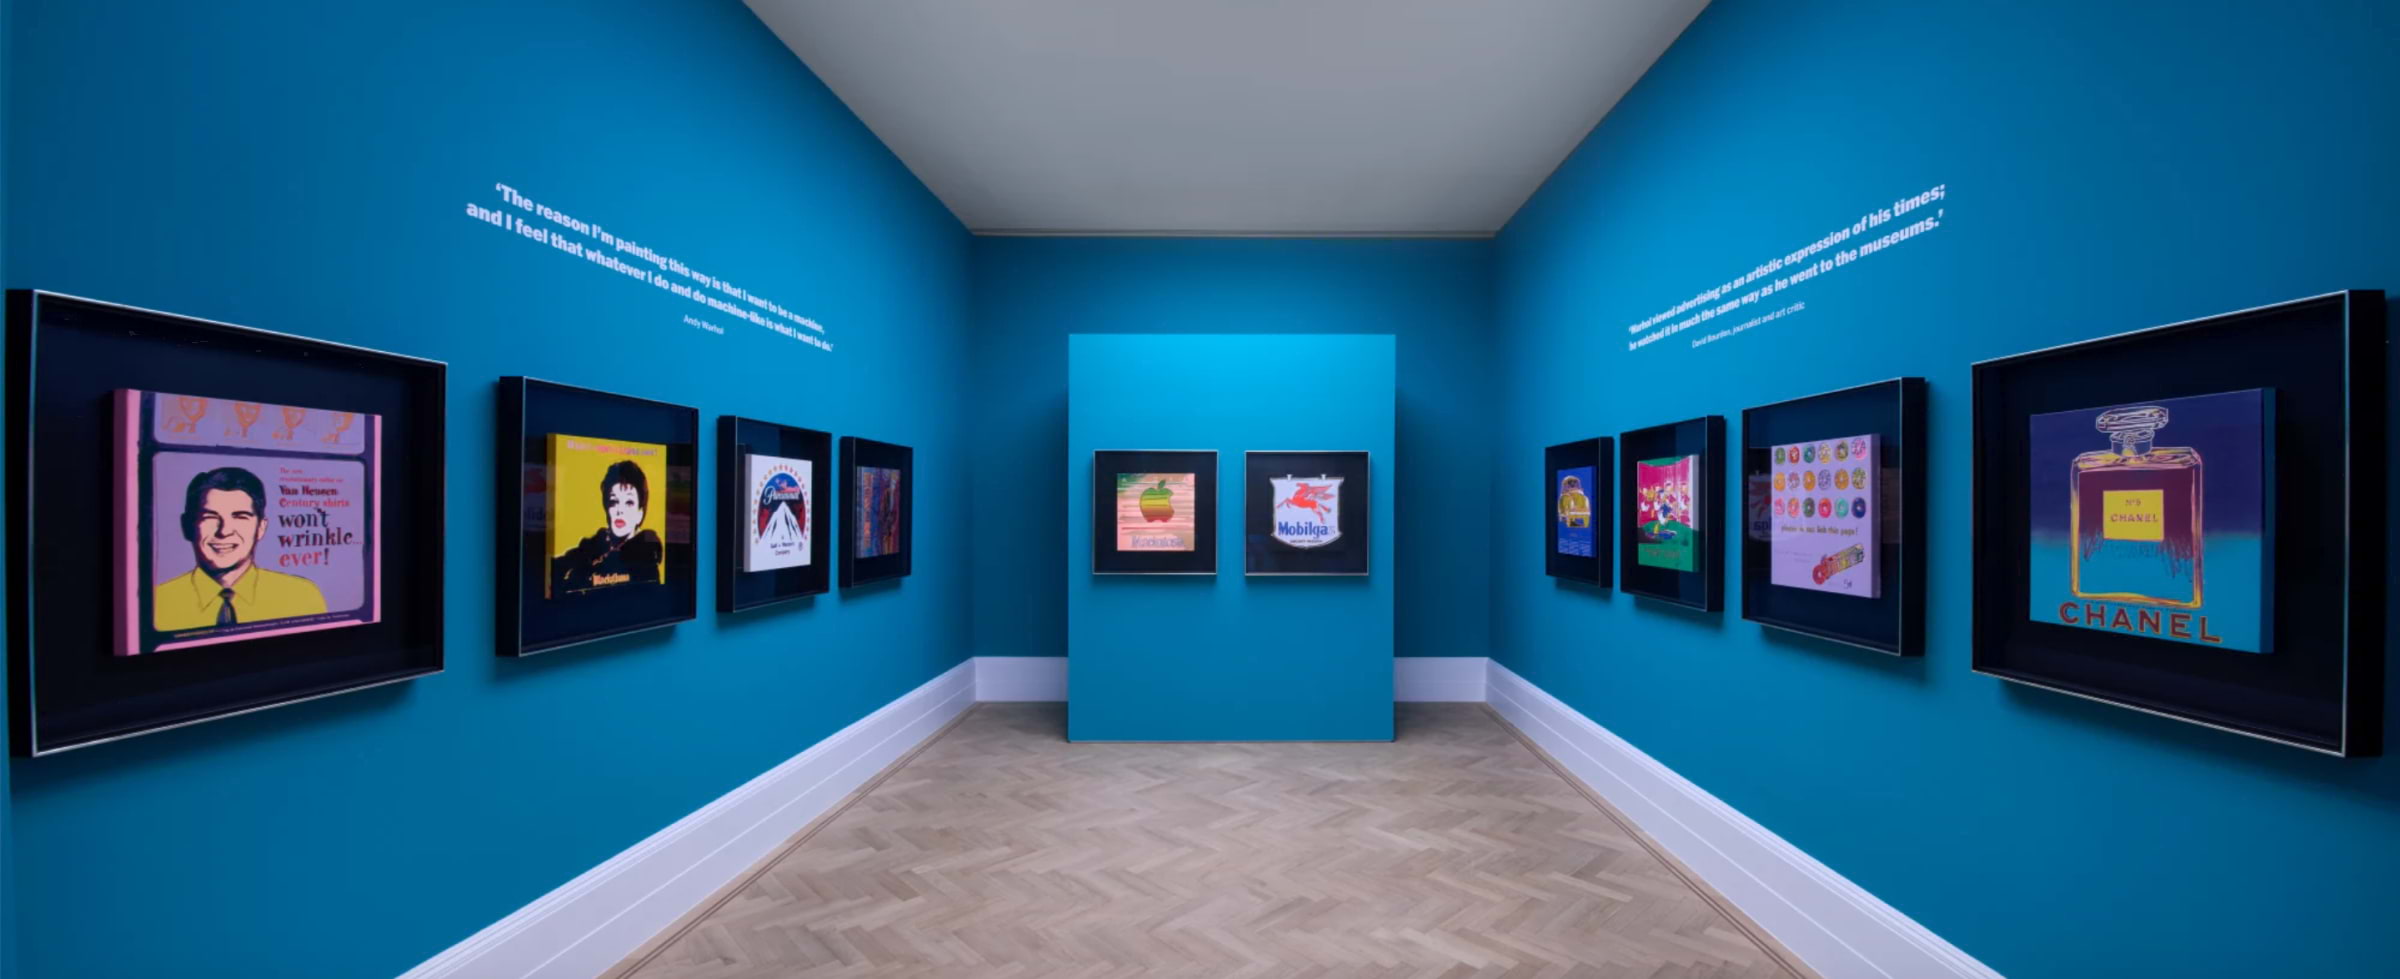 Londoners can see a new Andy Warhol exhibition for free